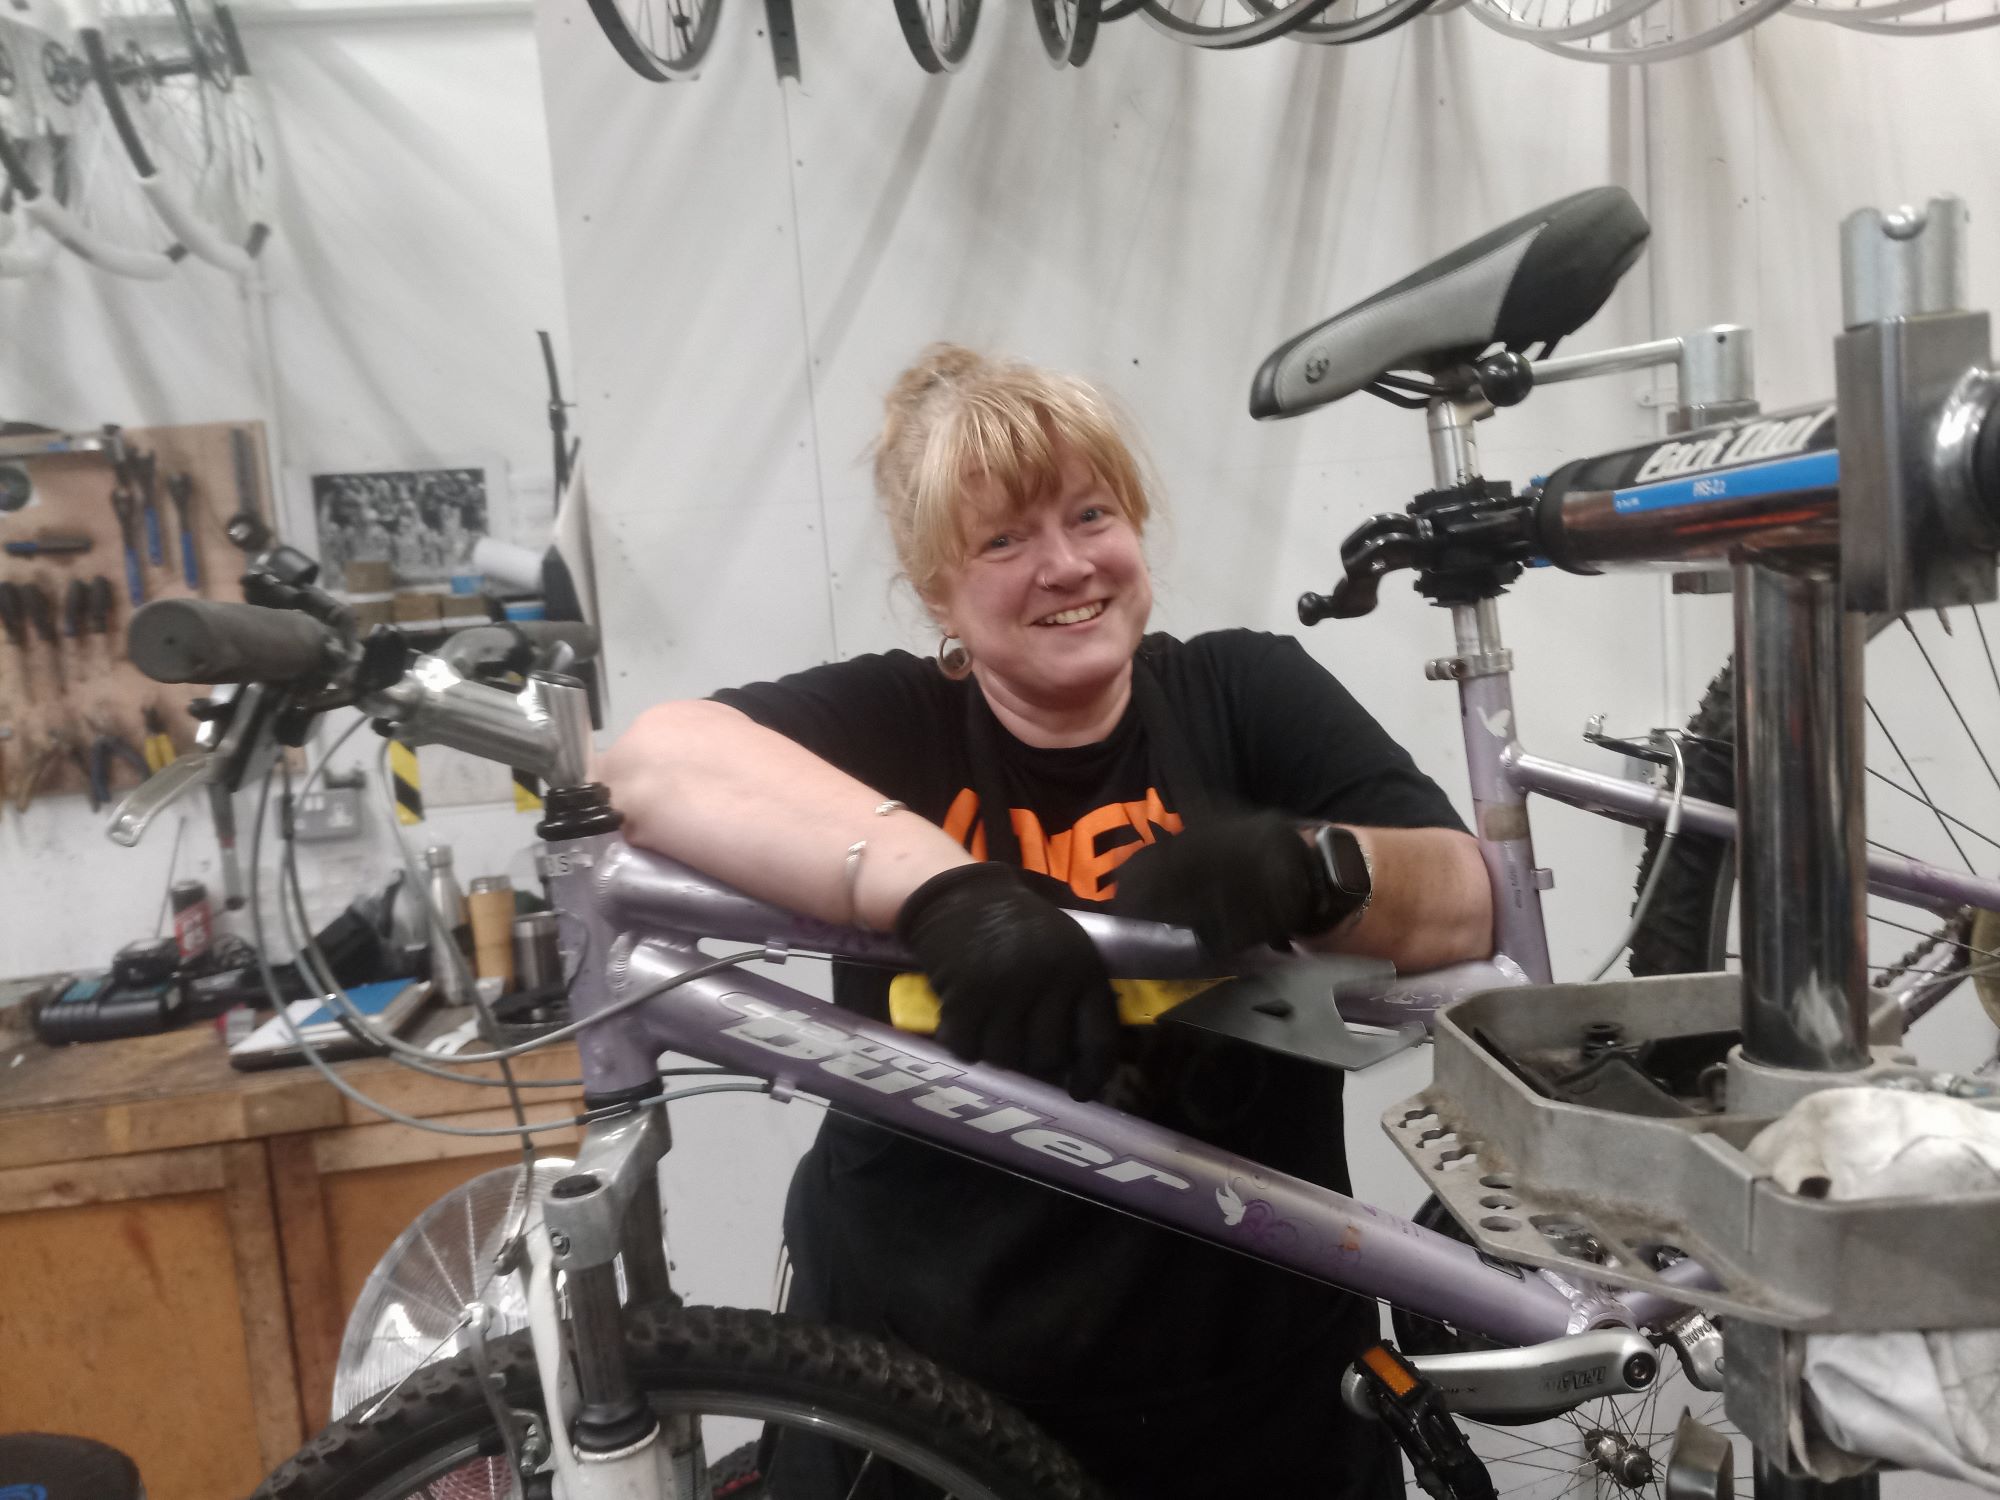 Cath Palgrave standing being a bicycle on a stand that she is fixing. She has a big smile